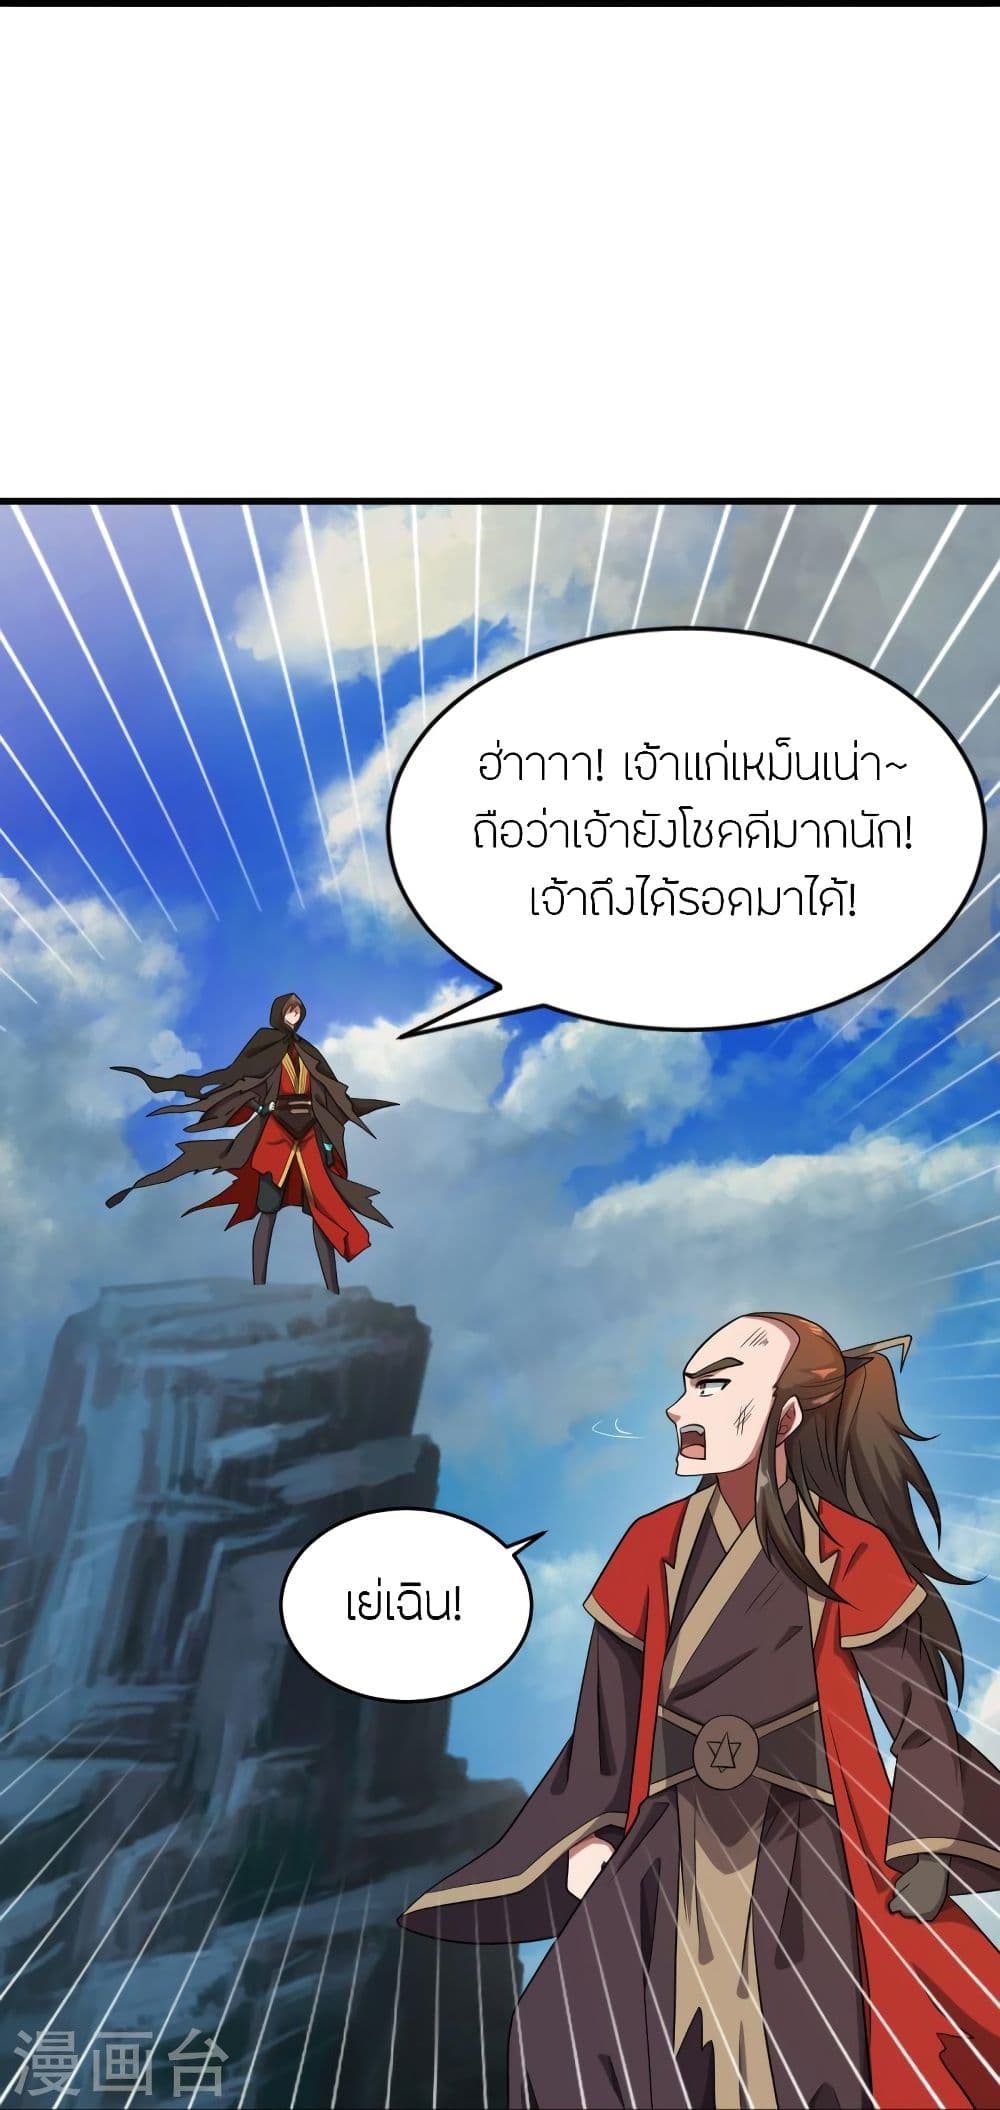 Banished Disciple's Counterattack เธเธฑเธเธฃเธเธฃเธฃเธ”เธดเน€เธเธตเธขเธเธขเธธเธ—เธ 304 (86)